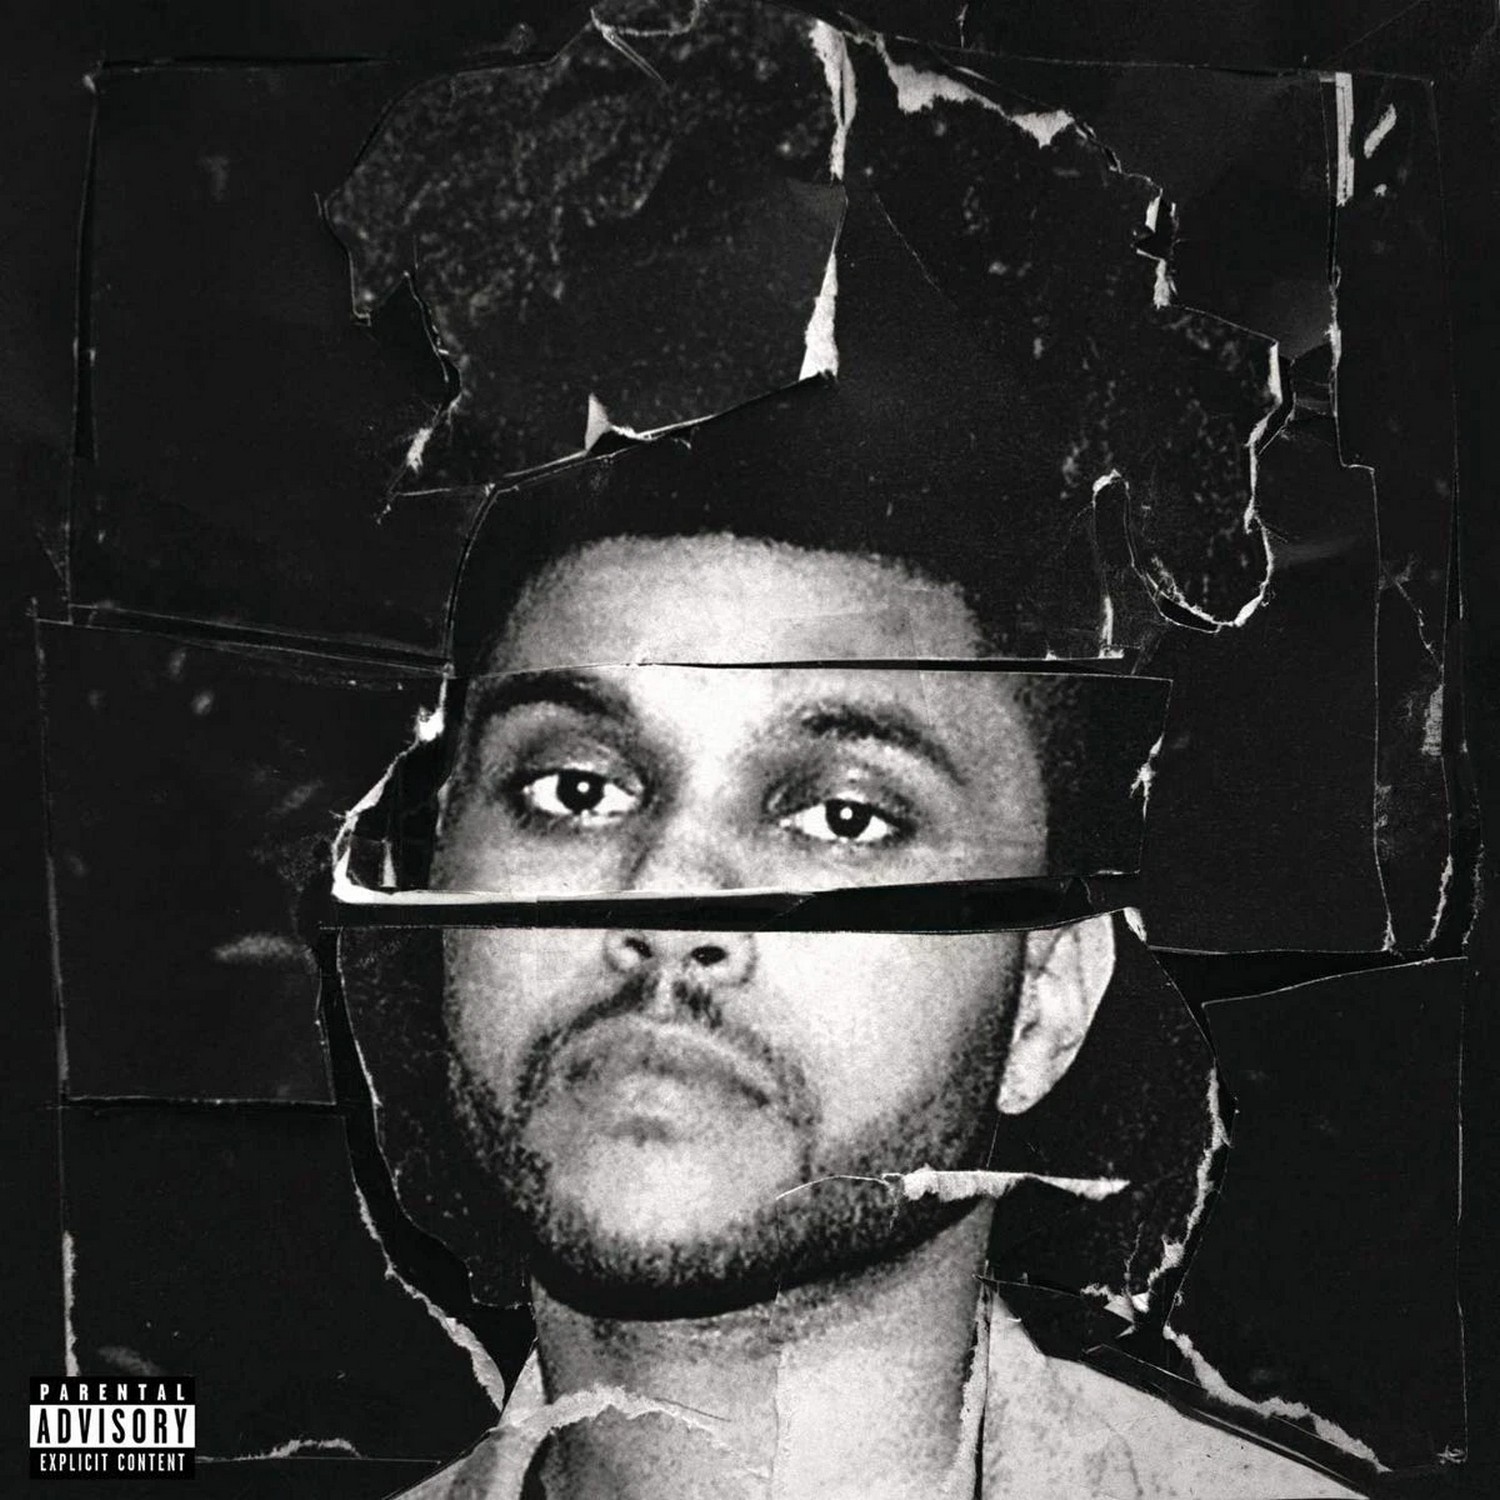 The Weeknd Beauty Behind The Madness album cover